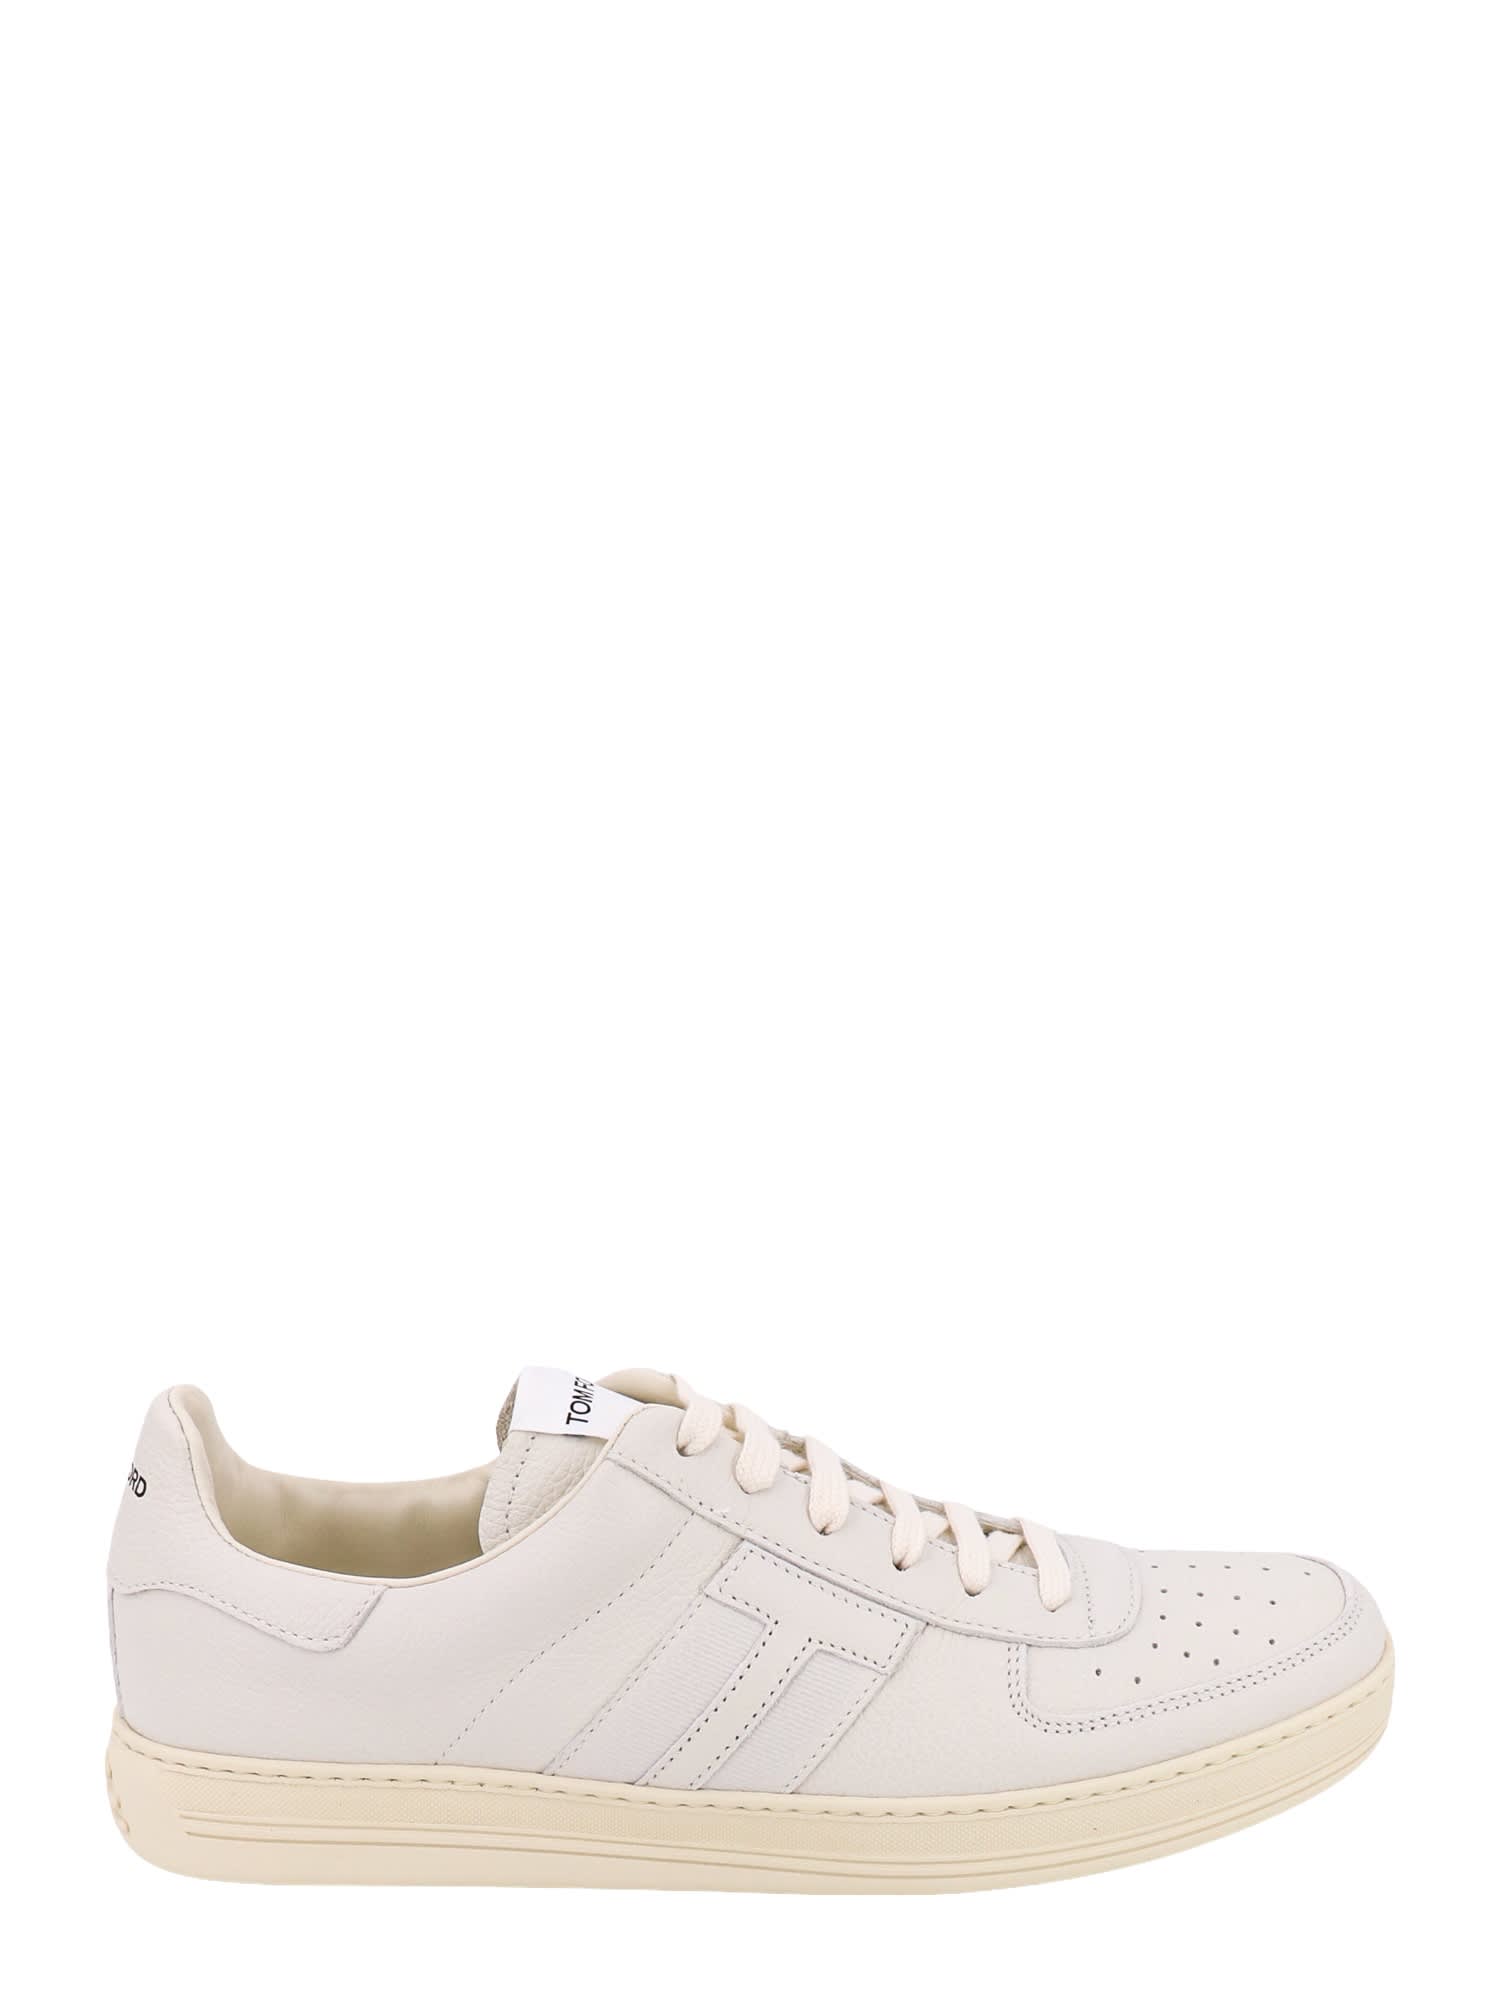 Tom Ford Sneakers In Butter Cream